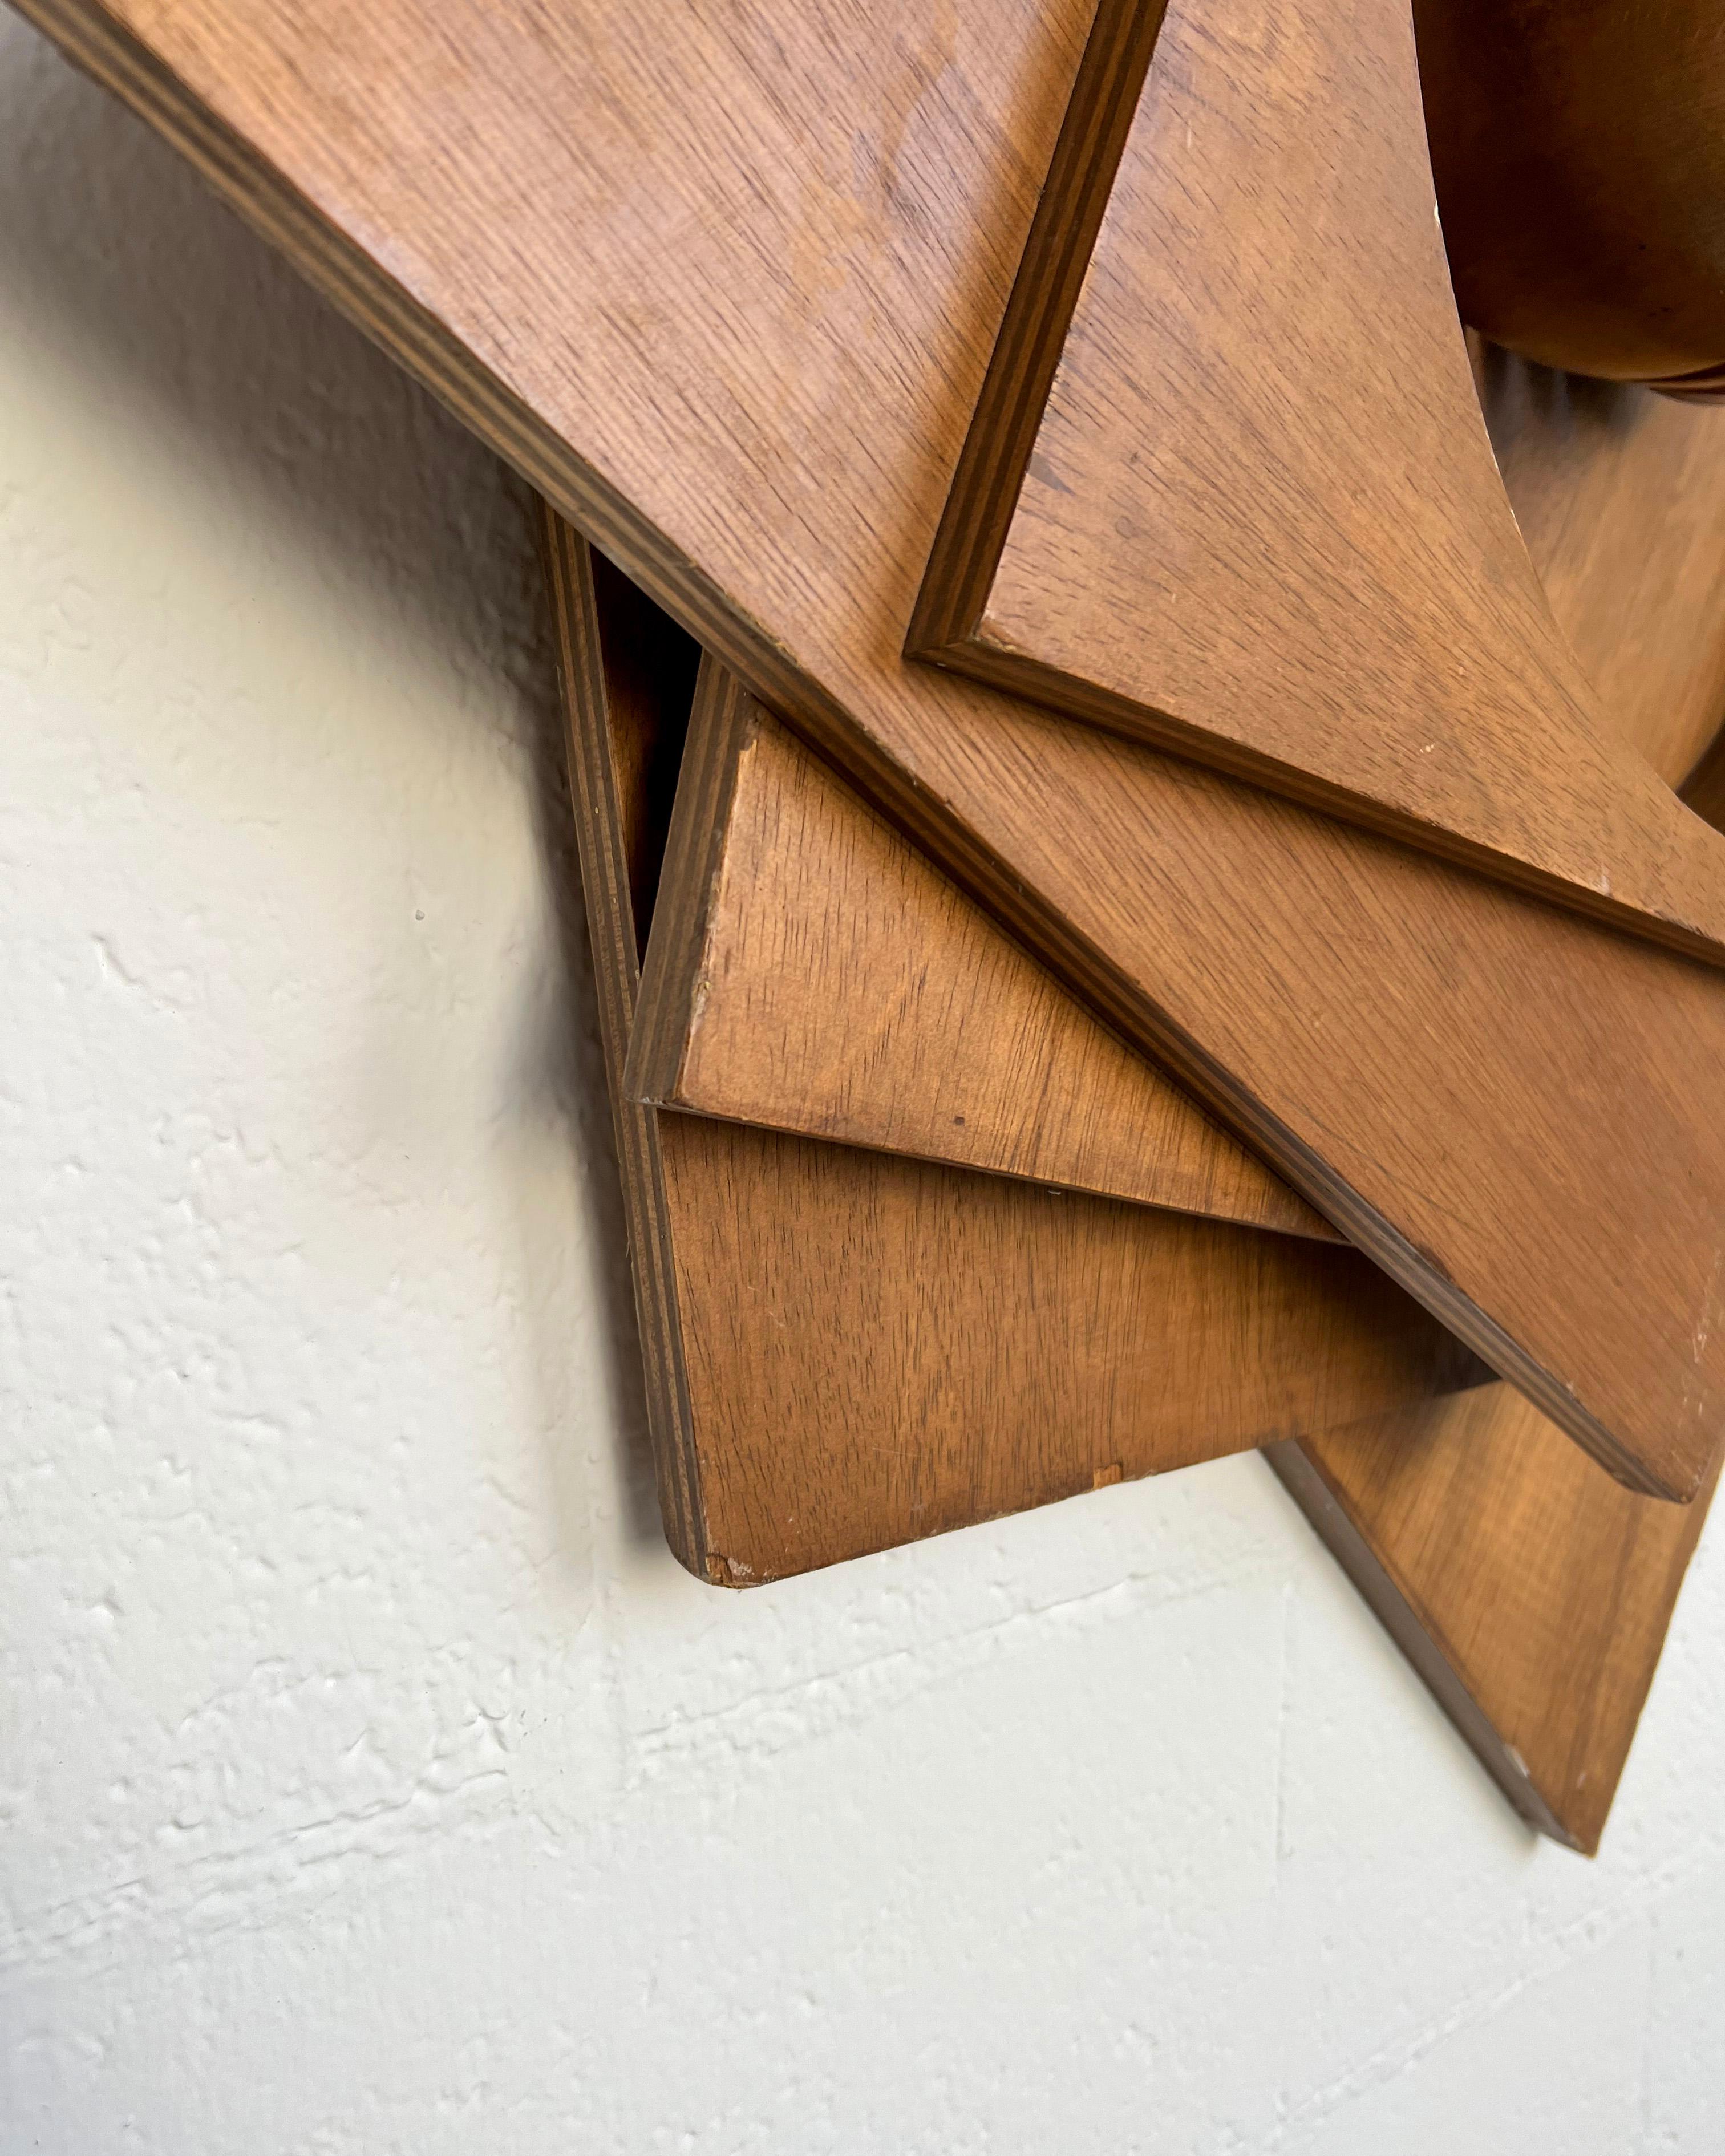 Italian Mid Century Modern Wall Mounted Wooden Sculpture, Geometric Accent Piece For Sale 7